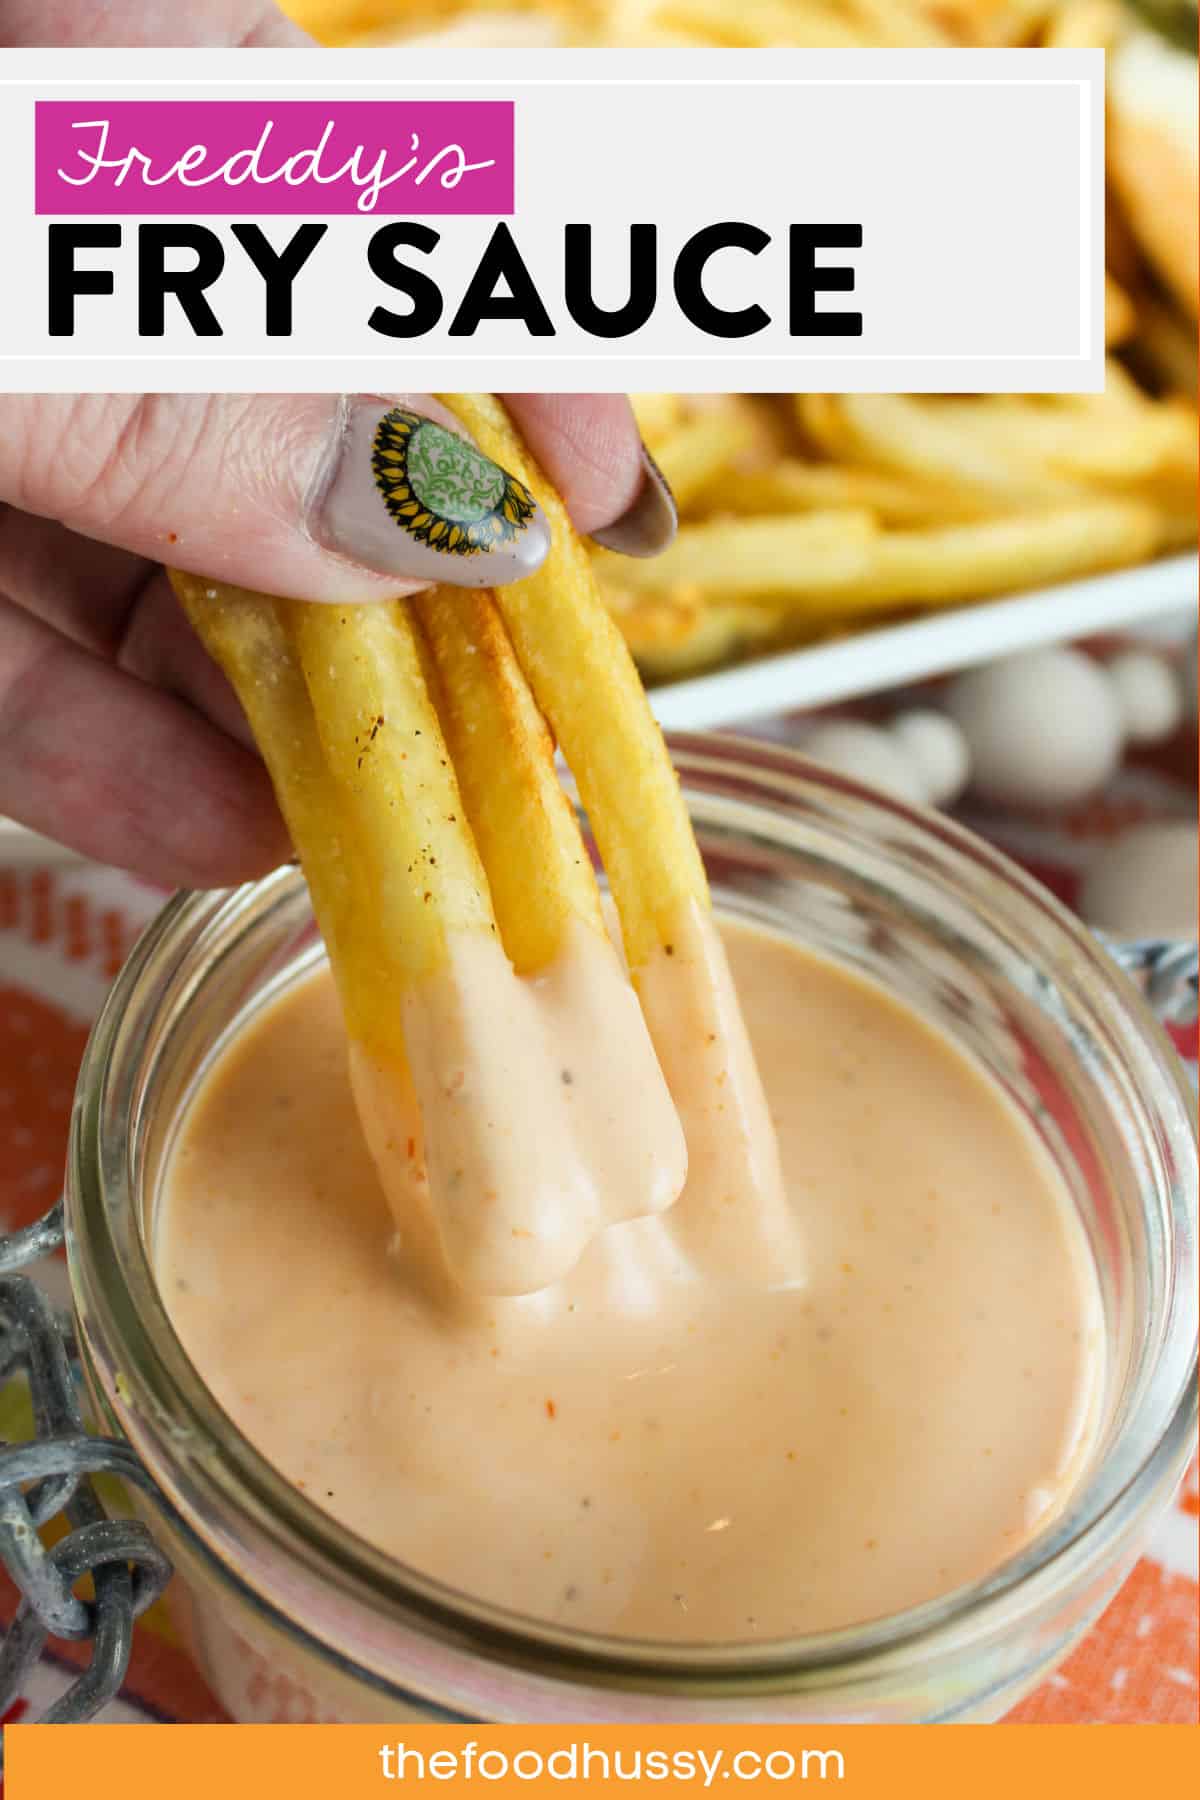 This copycat Freddy’s Fry Sauce is spot on and with only 4 ingredients - you'll be dippin fries in no time! Freddy’s Famous Fry Sauce offers a zippy twist on traditional ketchup and I promise you'll be making it all the time!  via @foodhussy